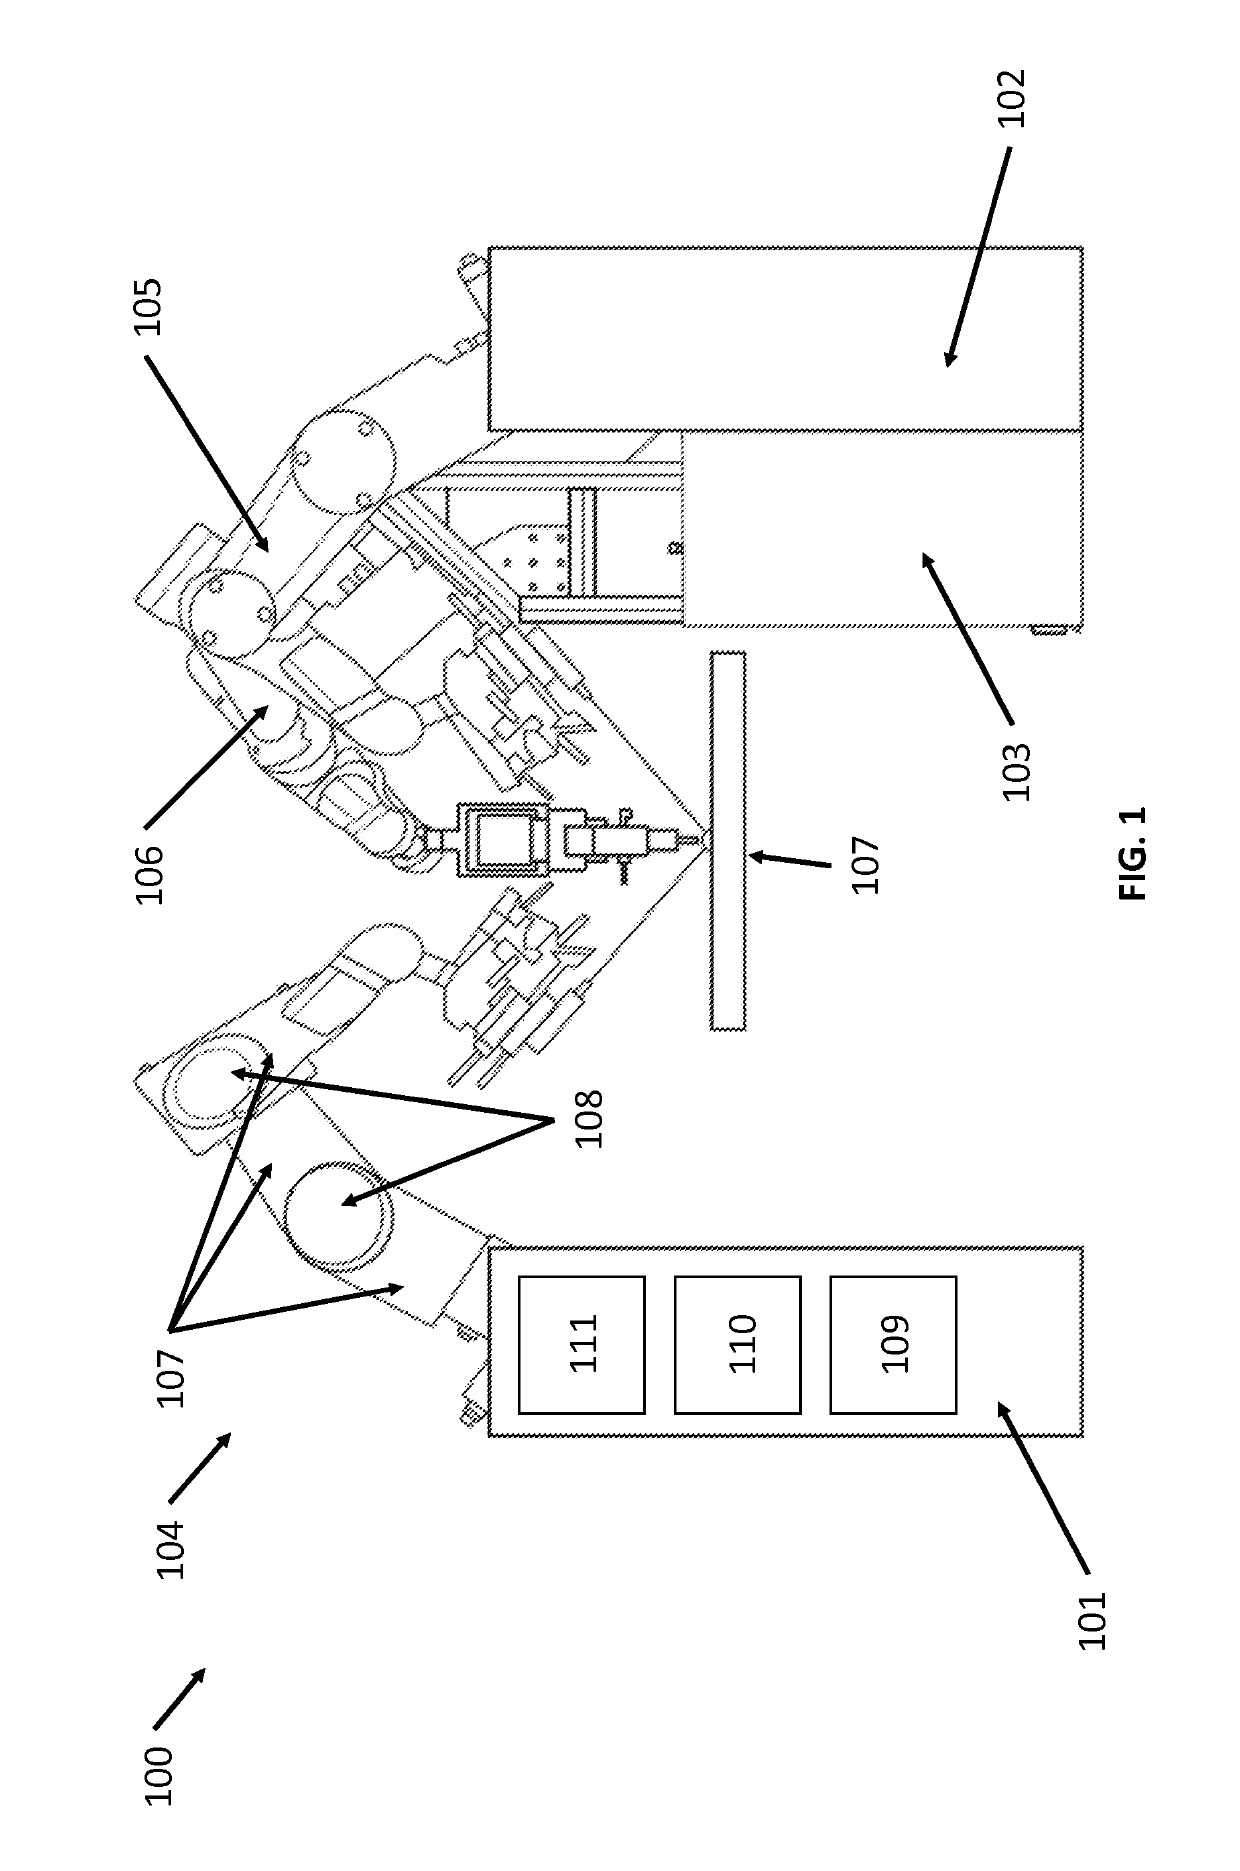 Apparatus and method for a global coordinate system for use in robotic surgery